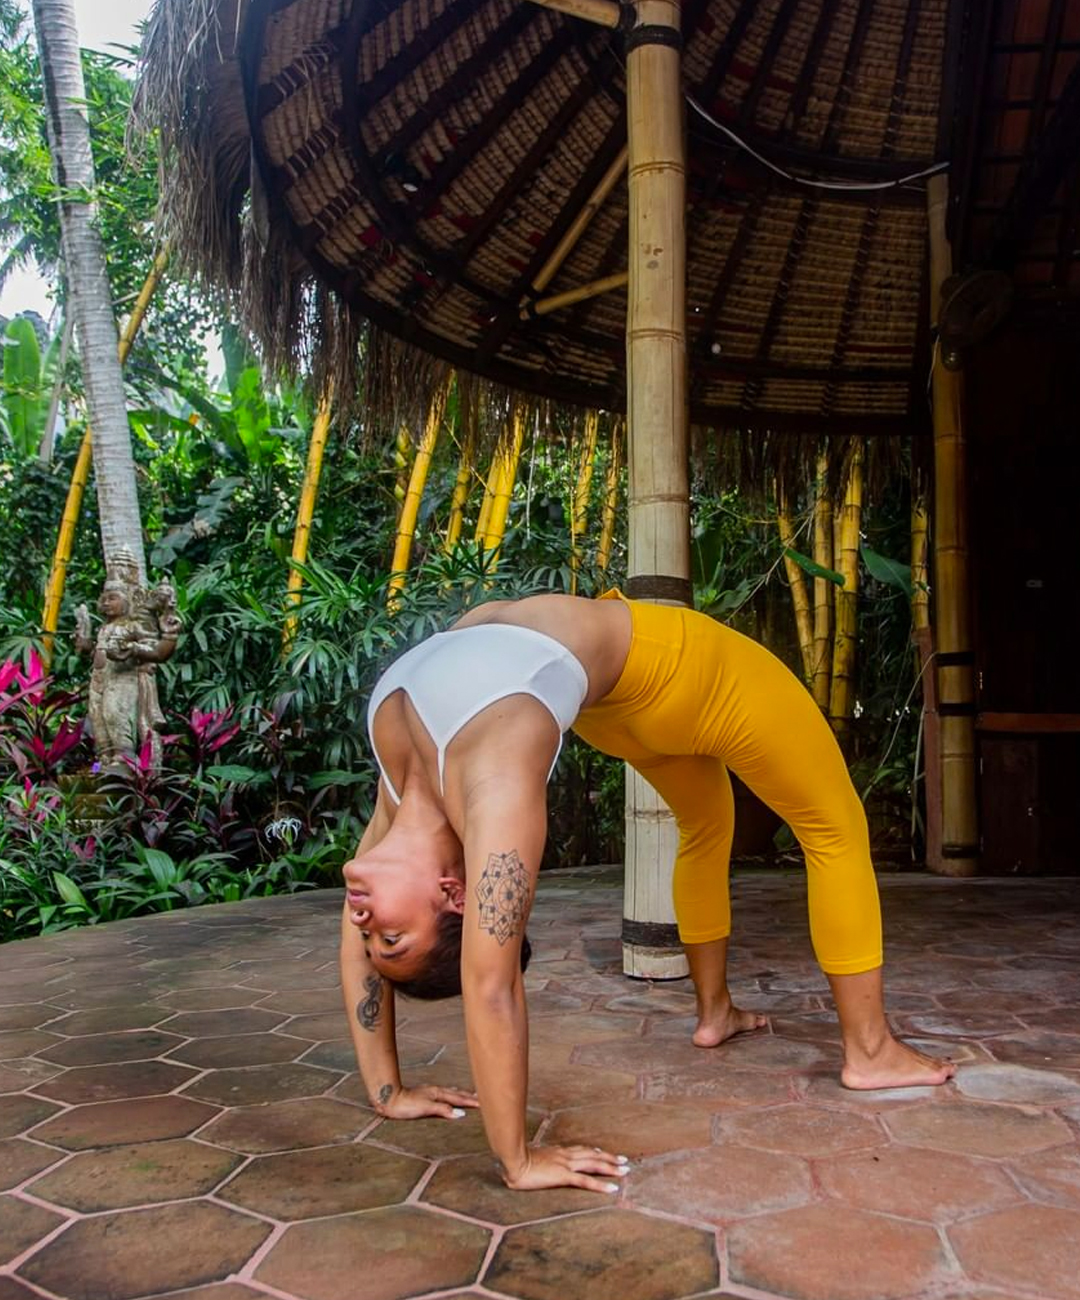 a person wearing yoga attire doing a backbend